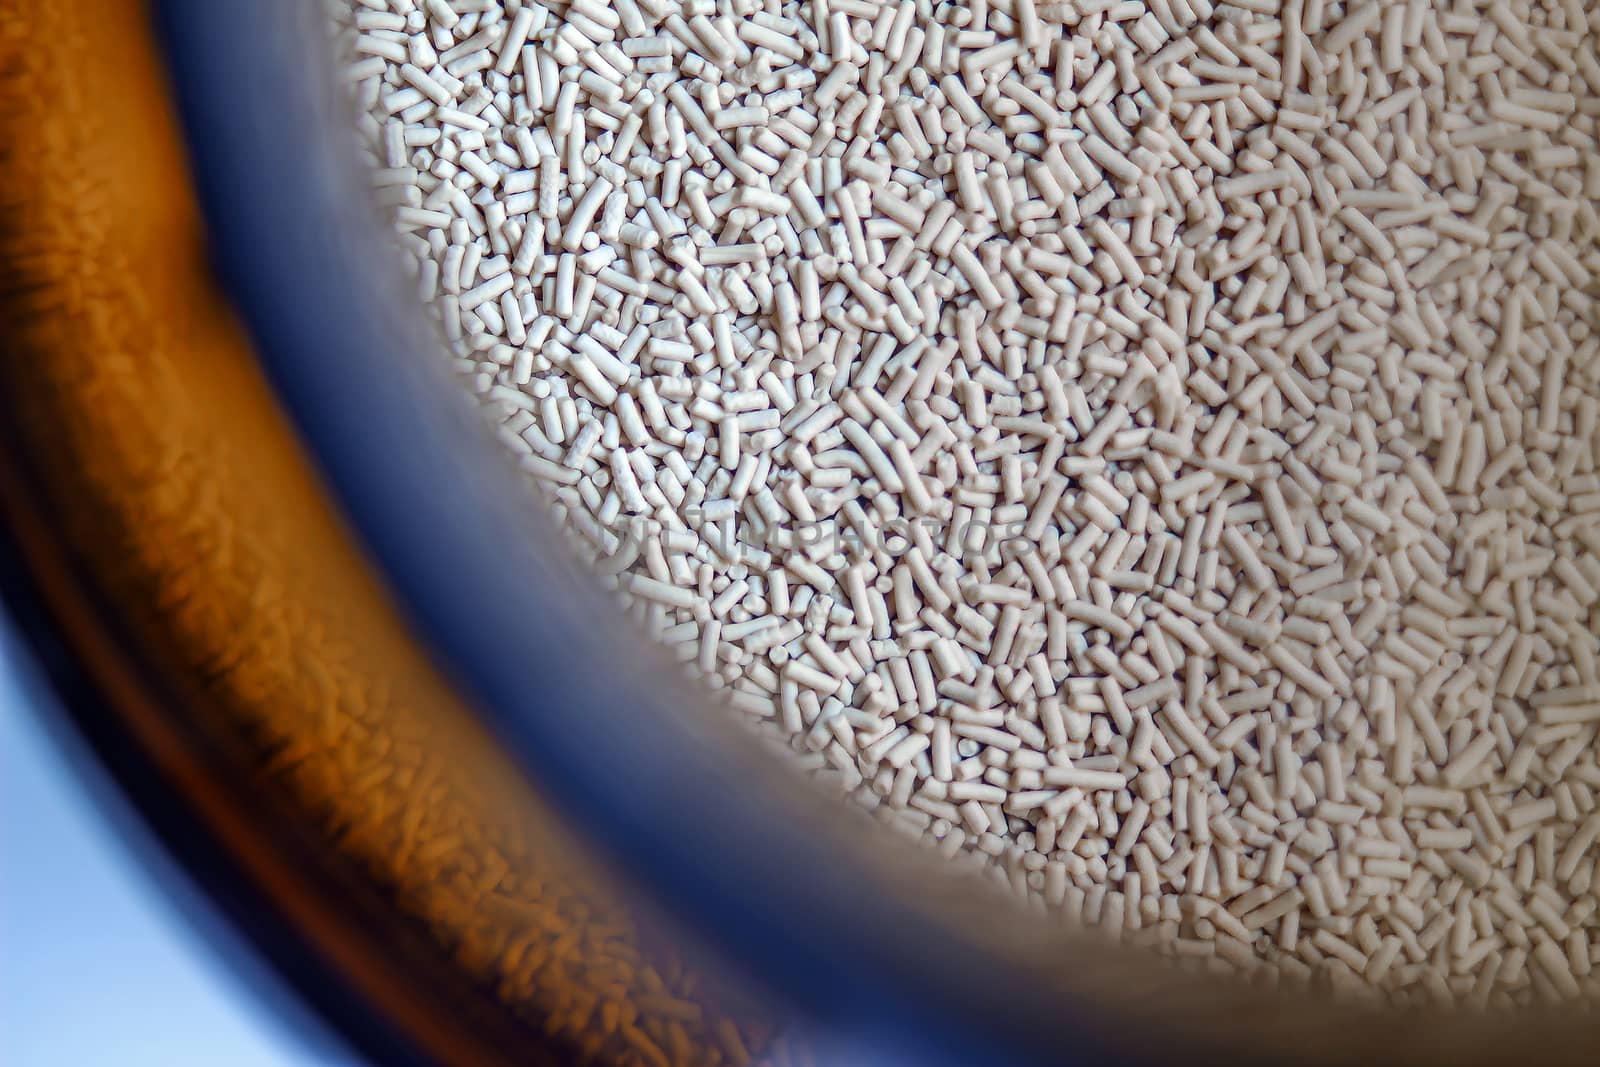 A top macro view of baking yeast container